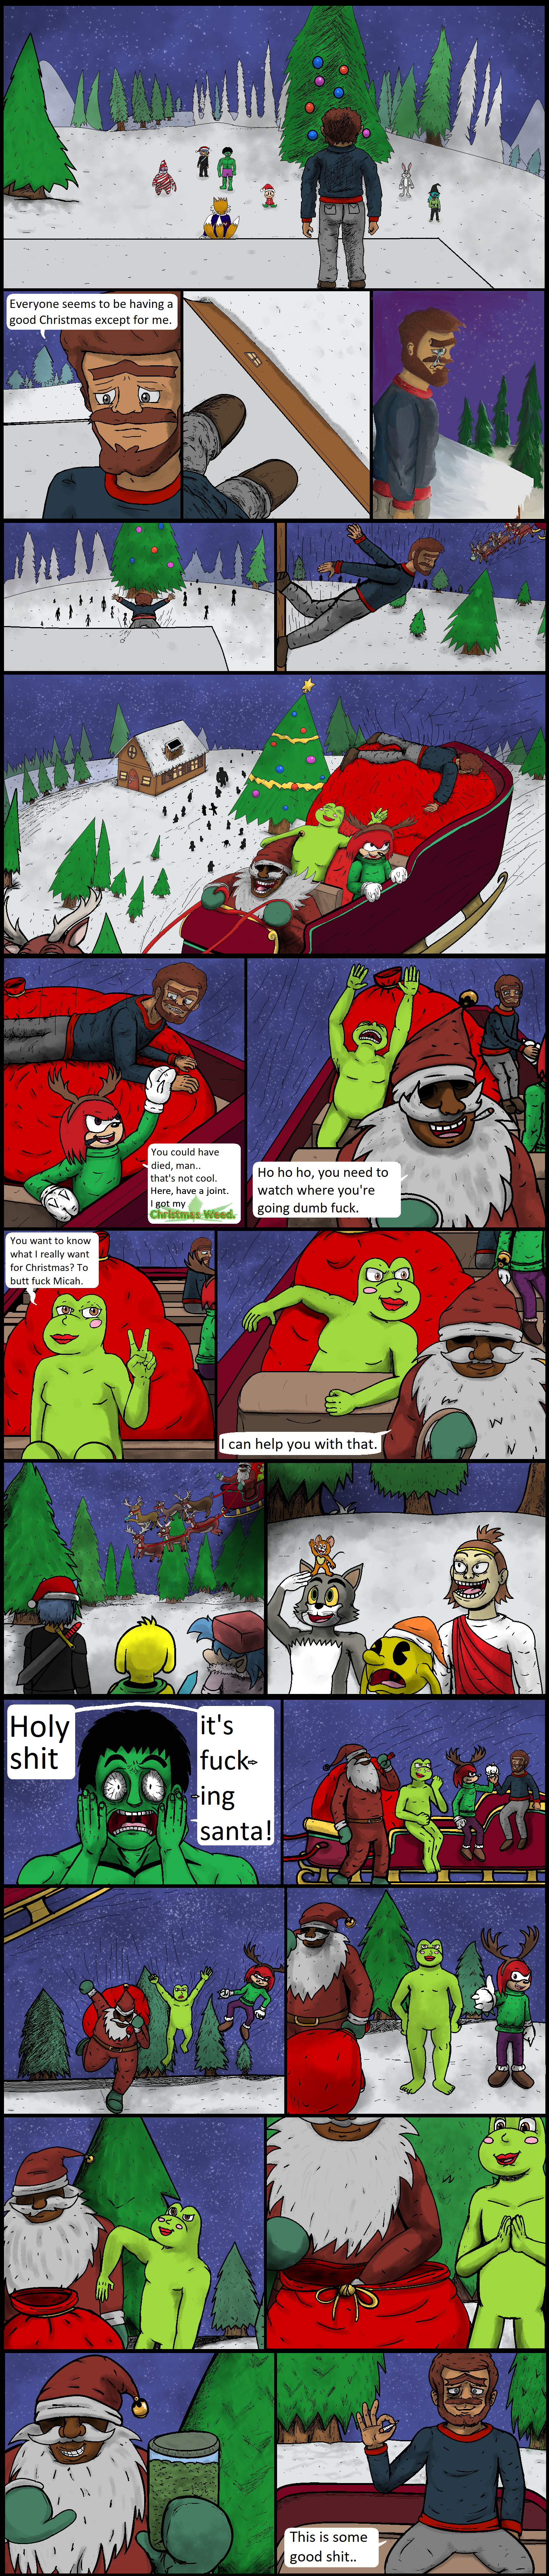 xmas/pg4.png. If you're seeing this, enable images. Or, perhaps we have a website issue. Try refreshing, if unsuccessful email commodorian@tailsgetstrolled.org with a detailed description of how you got here.